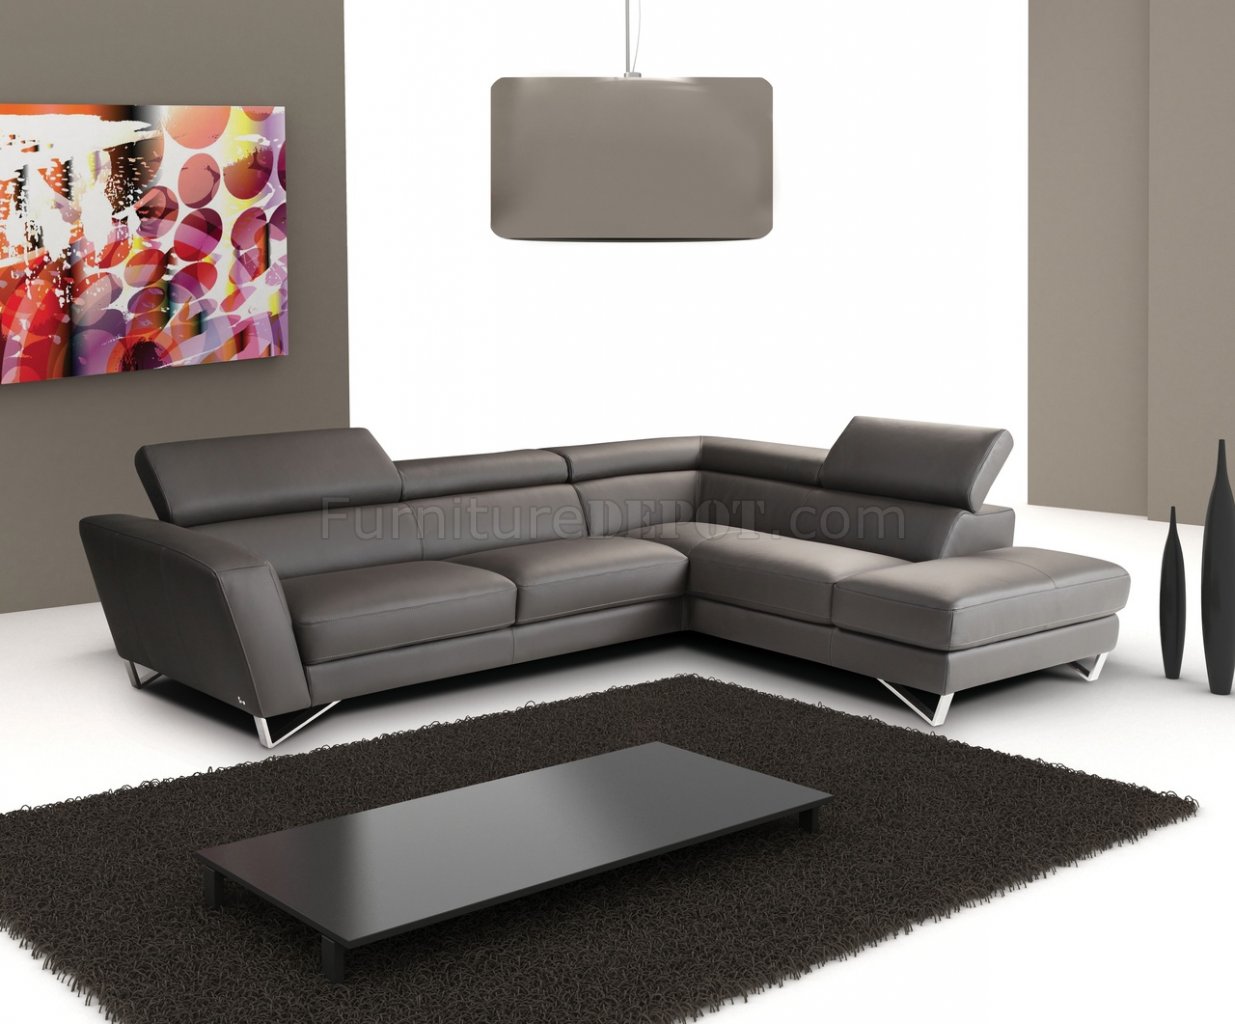 Full Leather Modern Sectional Sofa, Full Leather Sectional Couch